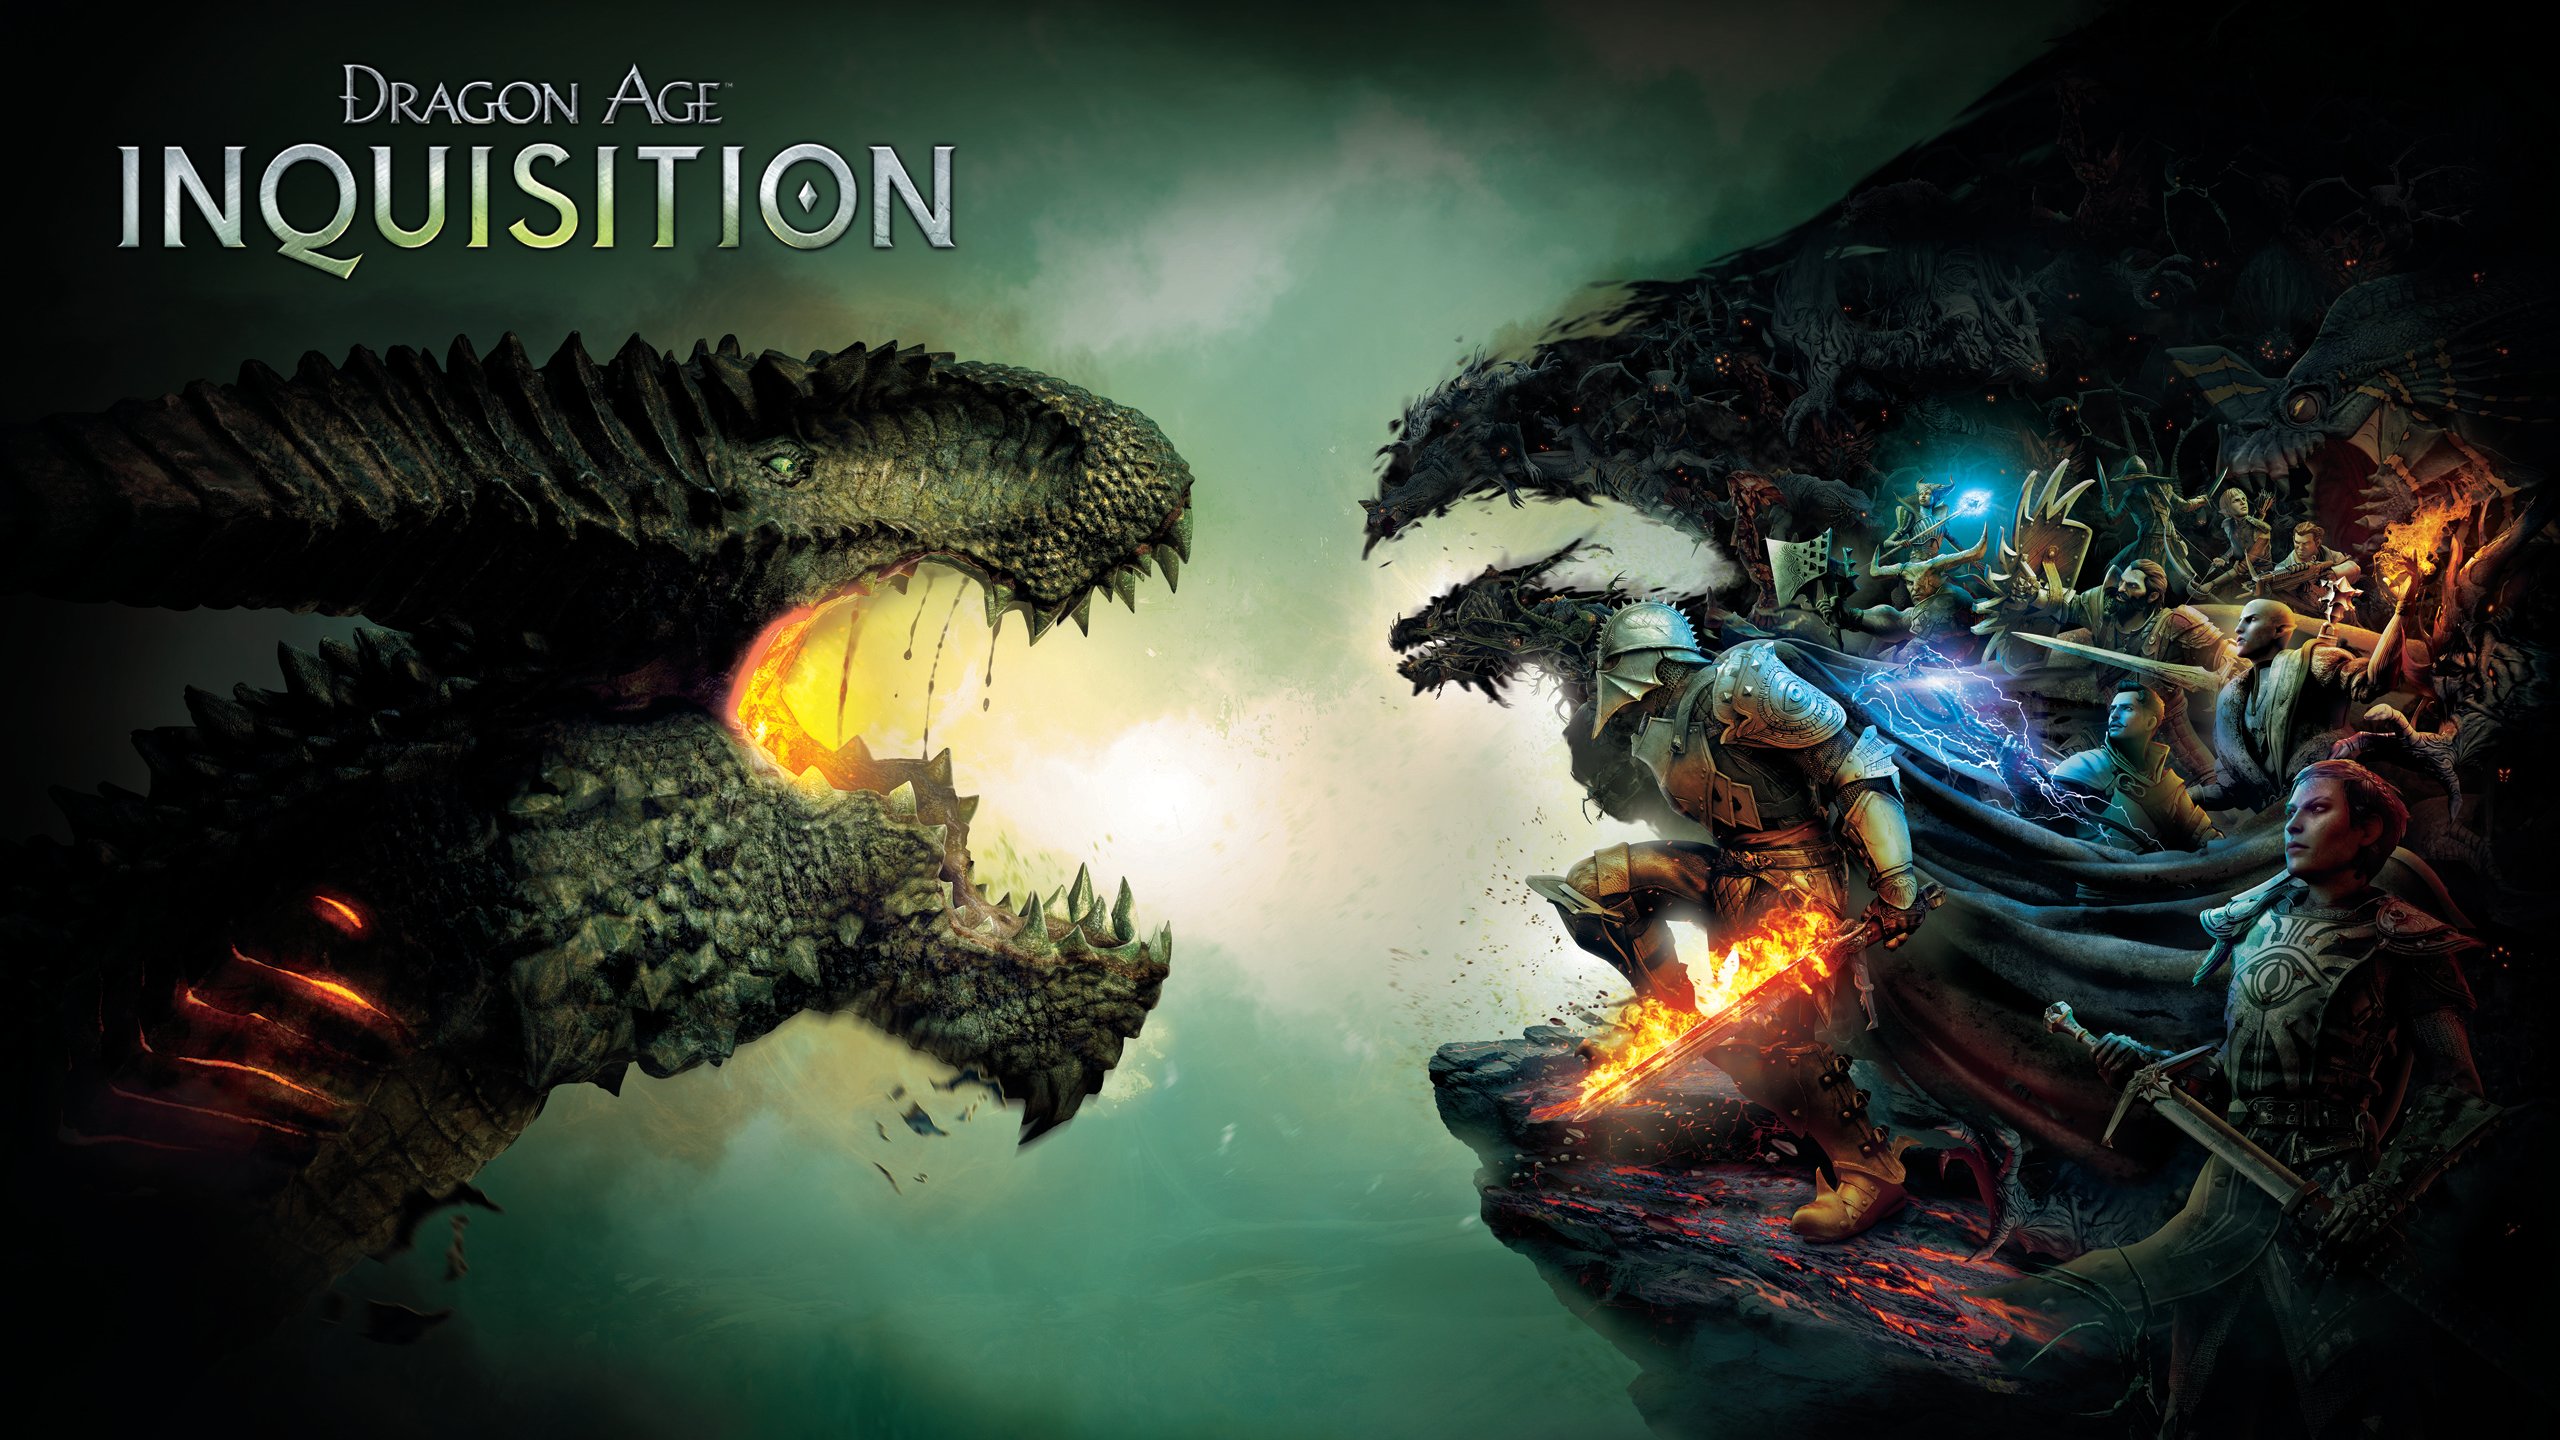 Dragon Age Inquisition Game Wallpapers HD Wallpapers 2560x1440